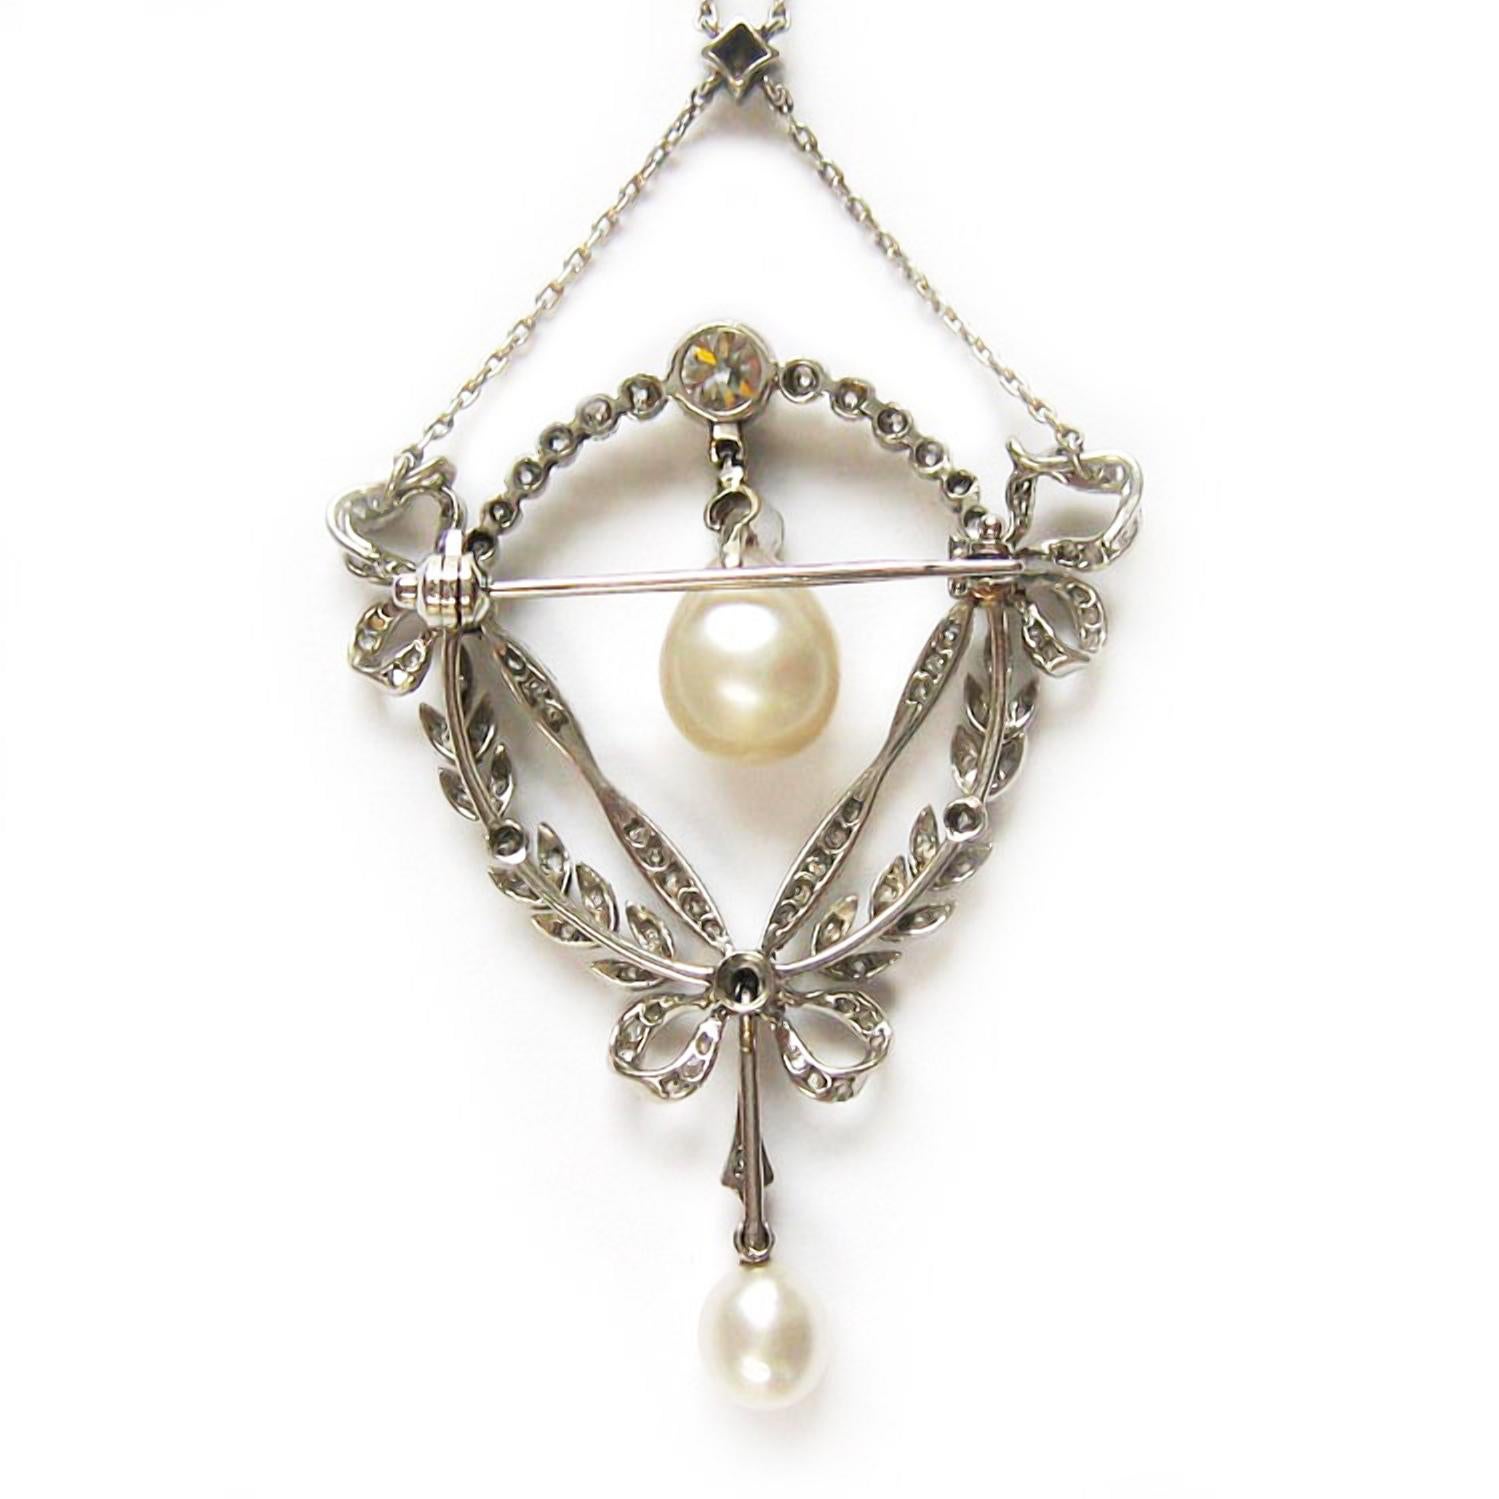 Brilliant Cut Fine Edwardian Natural Pearl and Diamond Necklace/ Brooch